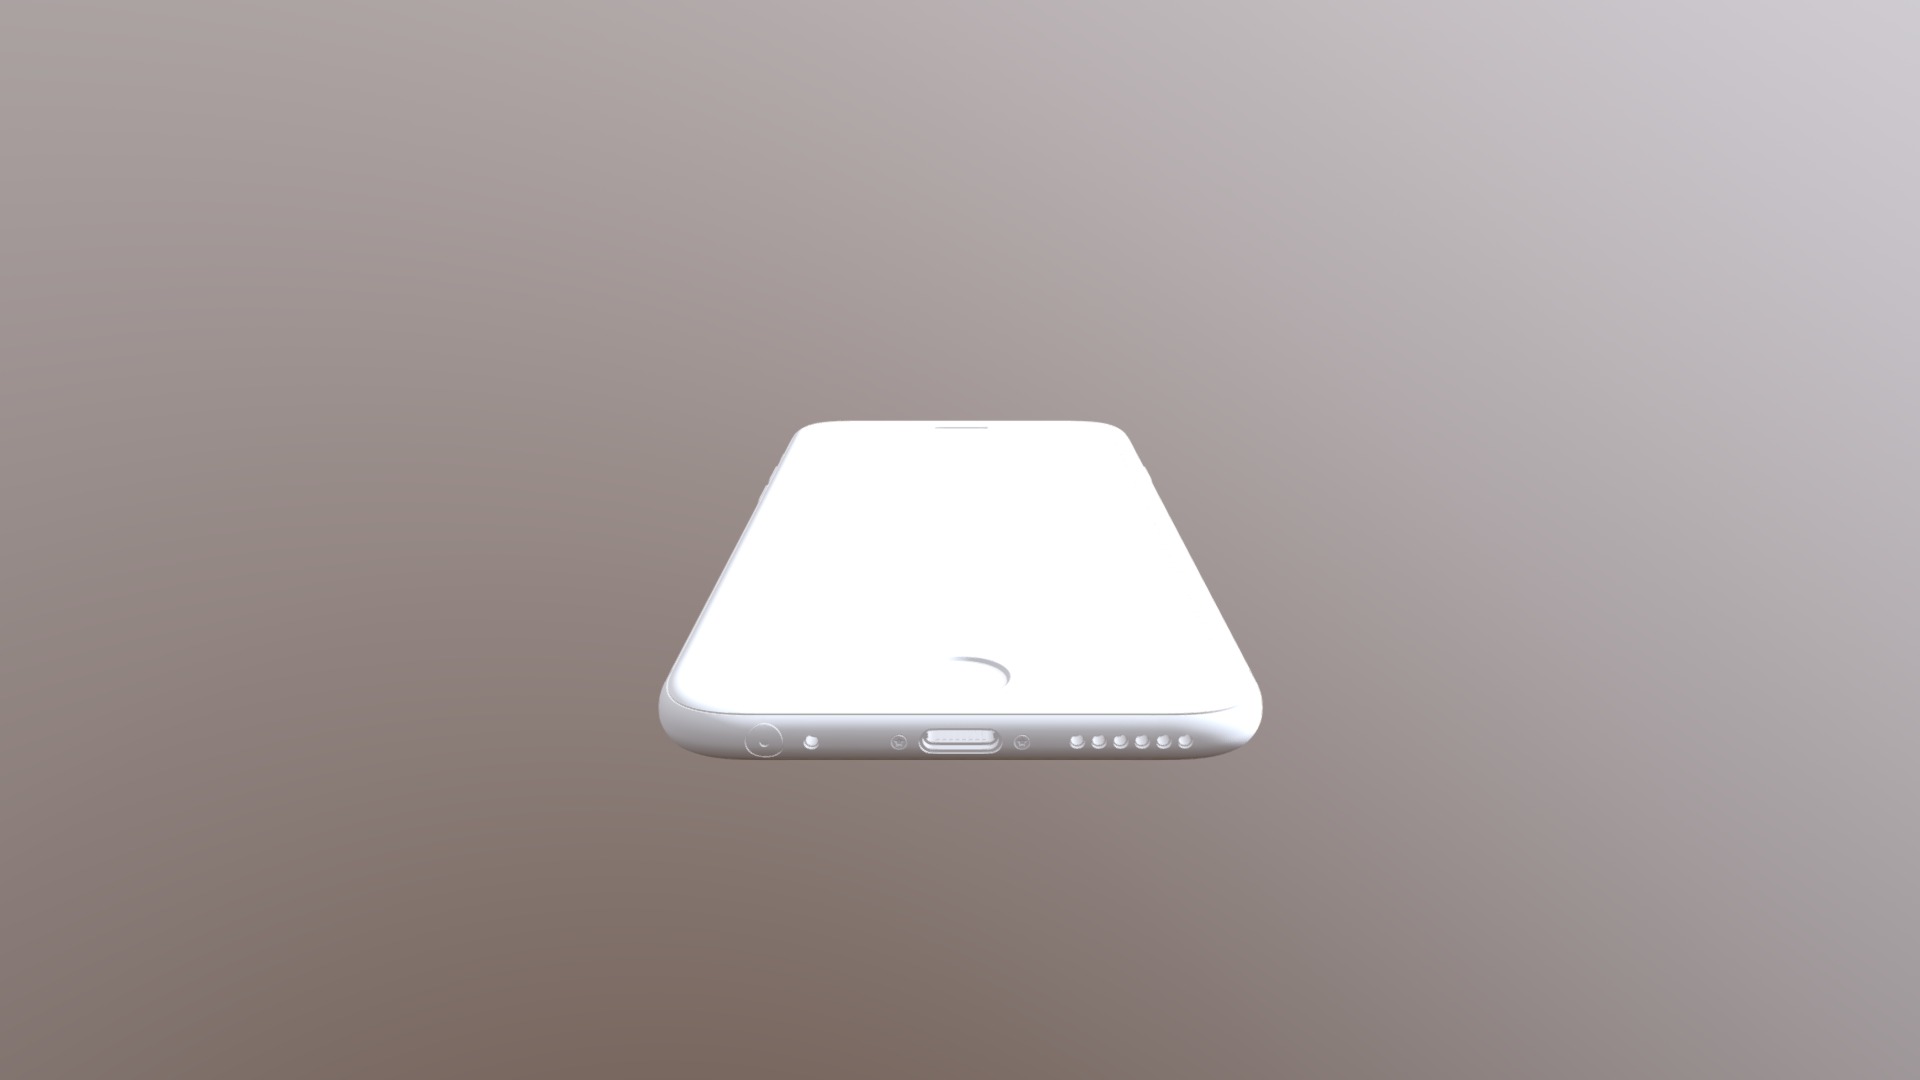 3D model iPhone 6 – original Apple dimensions - This is a 3D model of the iPhone 6 - original Apple dimensions. The 3D model is about a white cell phone.